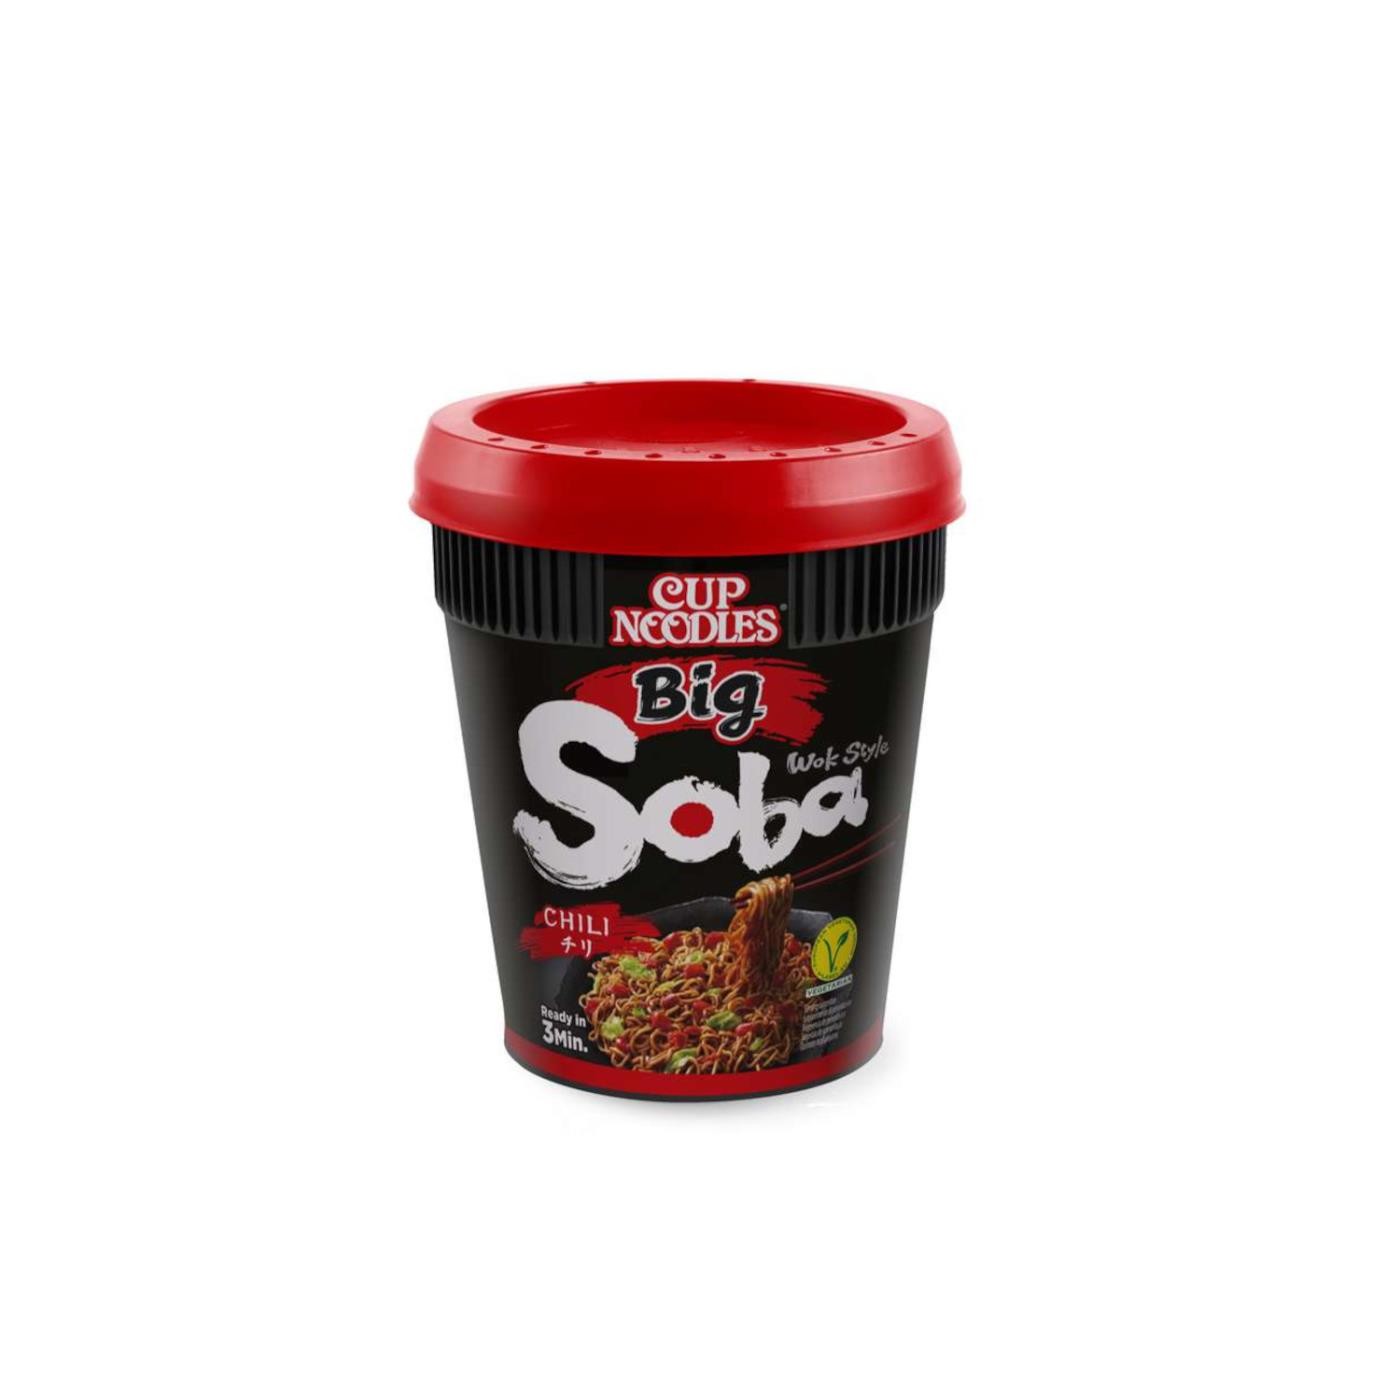 NISSIN Soba Nudel Cup, Big Chili 115g Becher